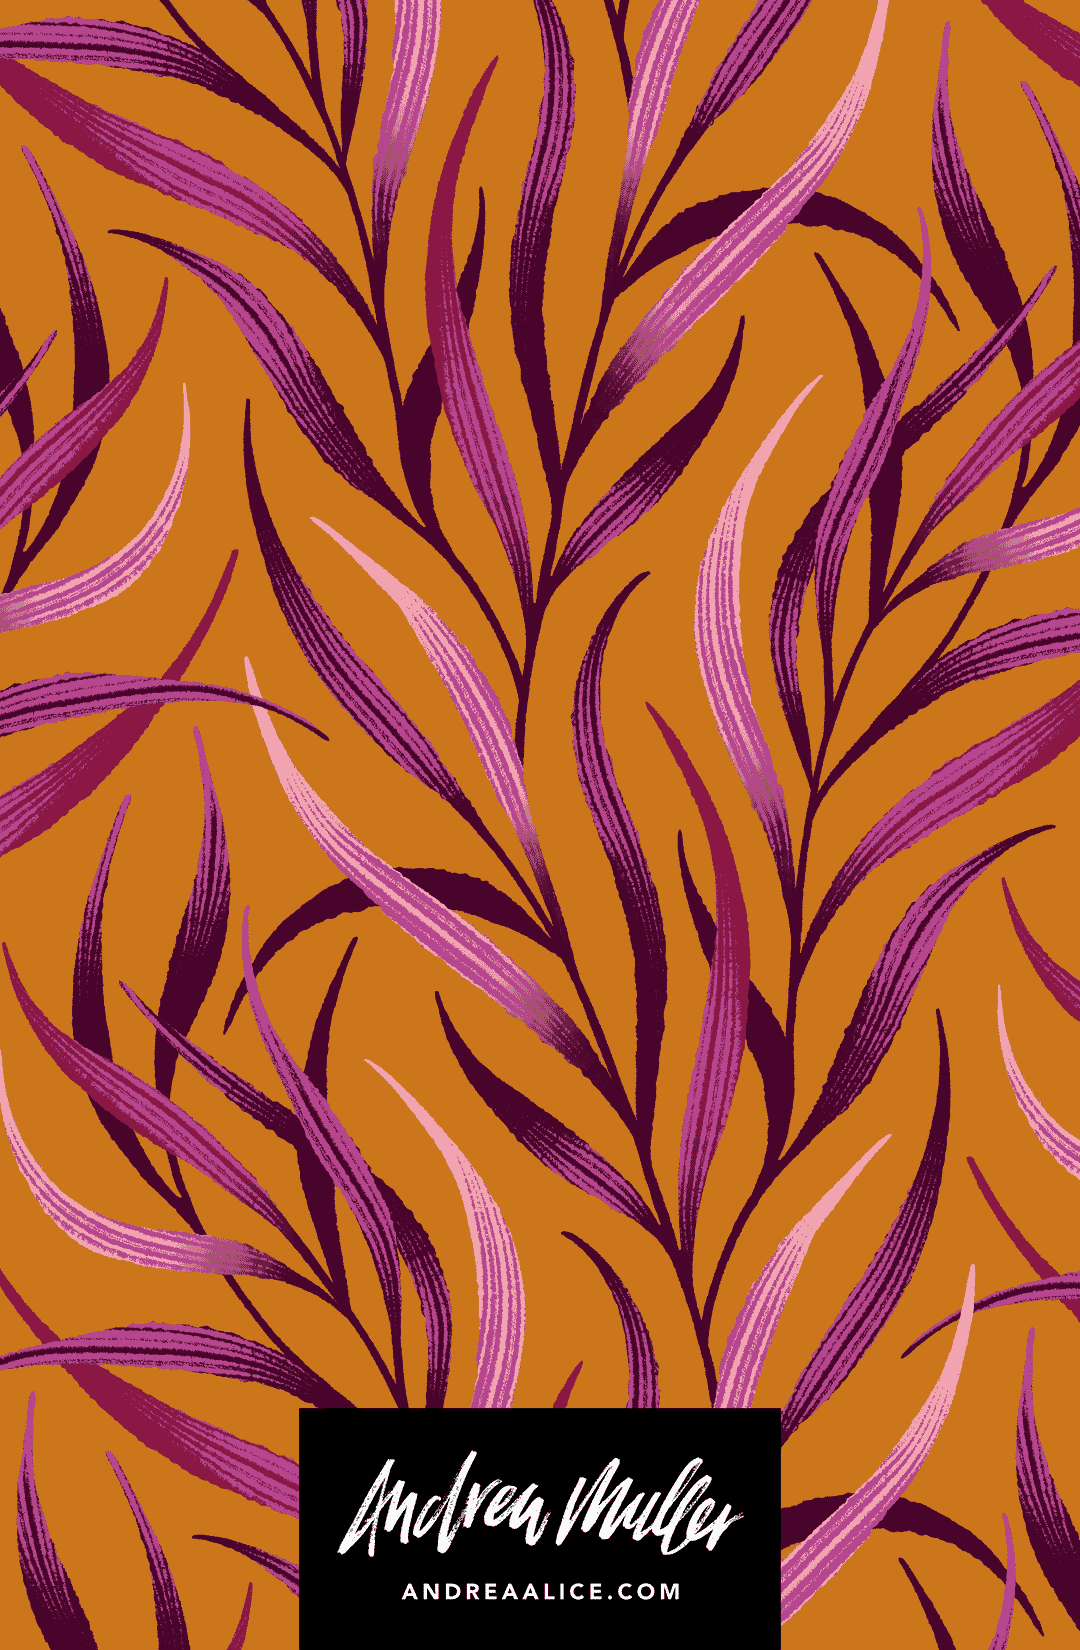 Pink wavy palm leaf pattern illustration on mustard gold background by Andrea Muller